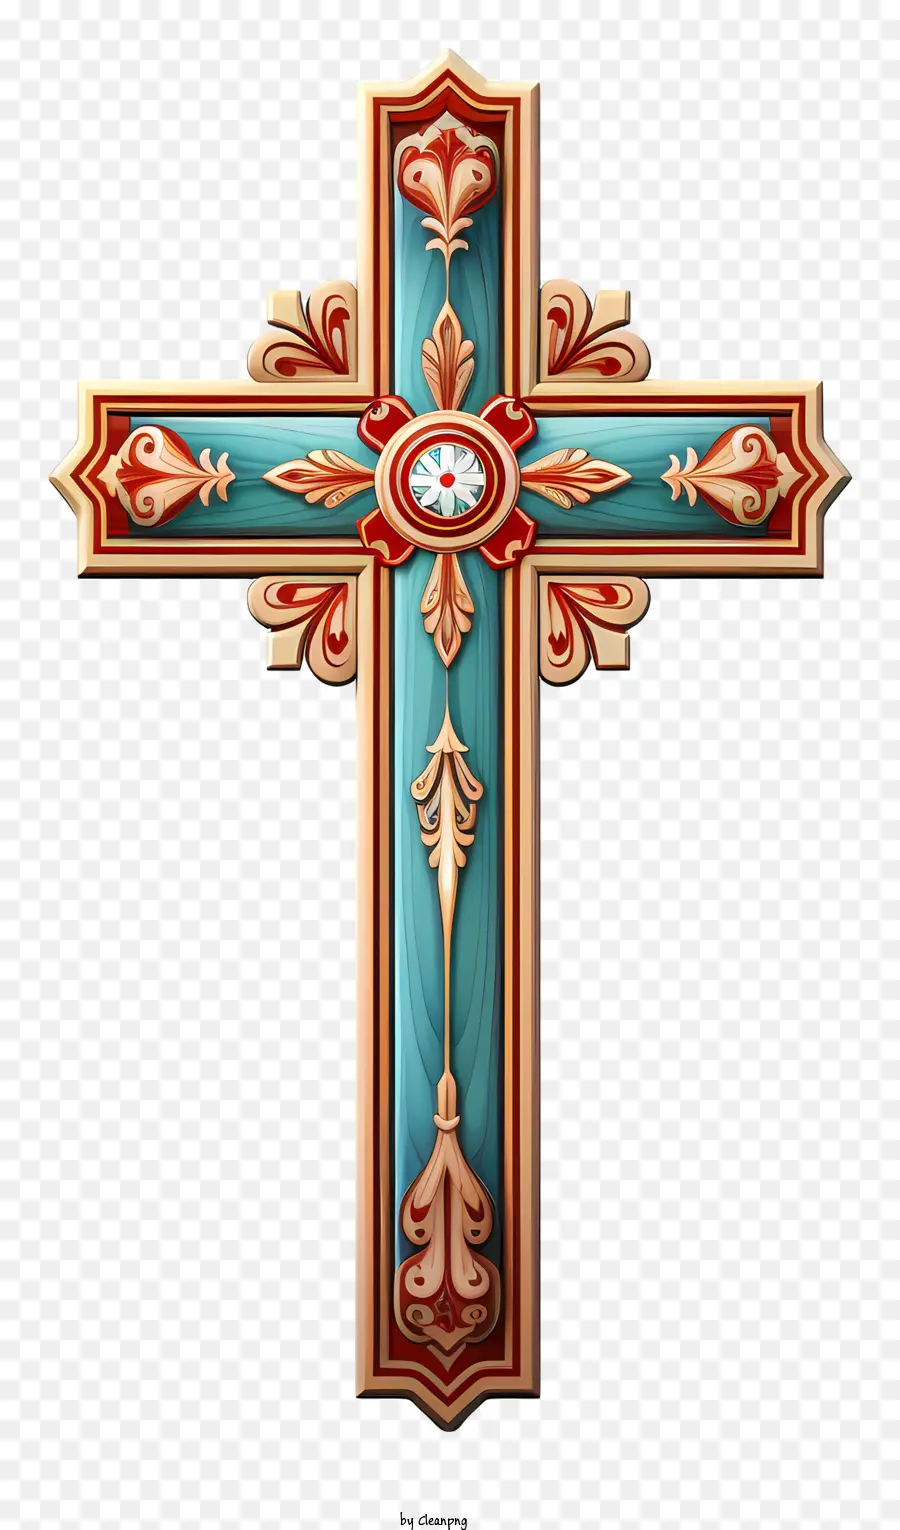 wood cross green floral pattern red floral pattern diamond cross white and black accents